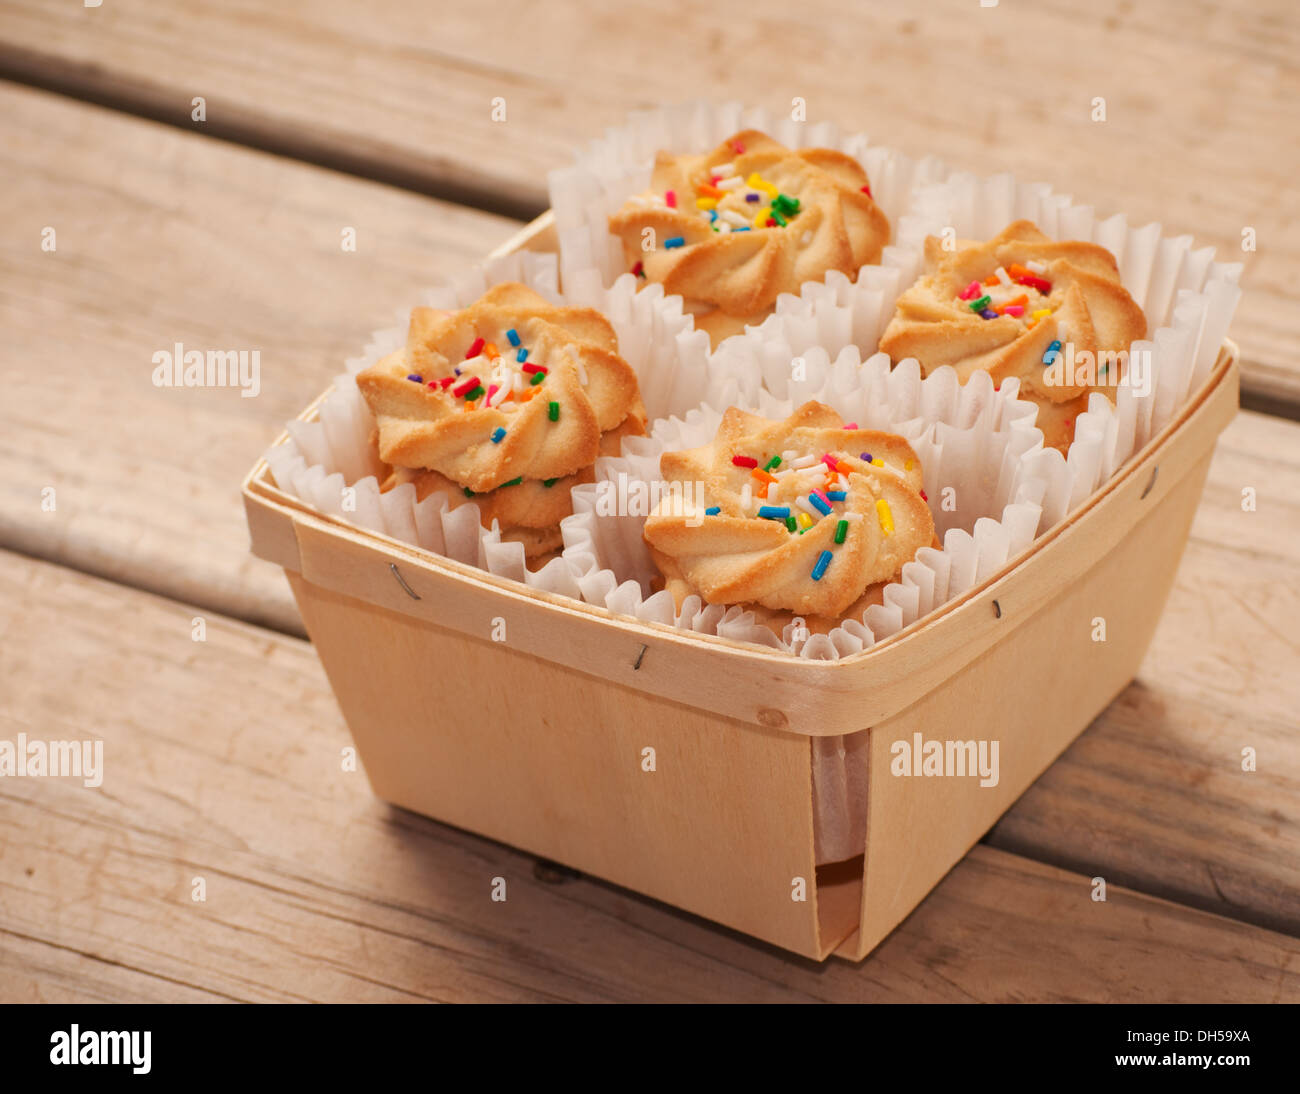 Cookies with colorful sprinkles on top, in a woven wooden basket on rustic board background Stock Photo